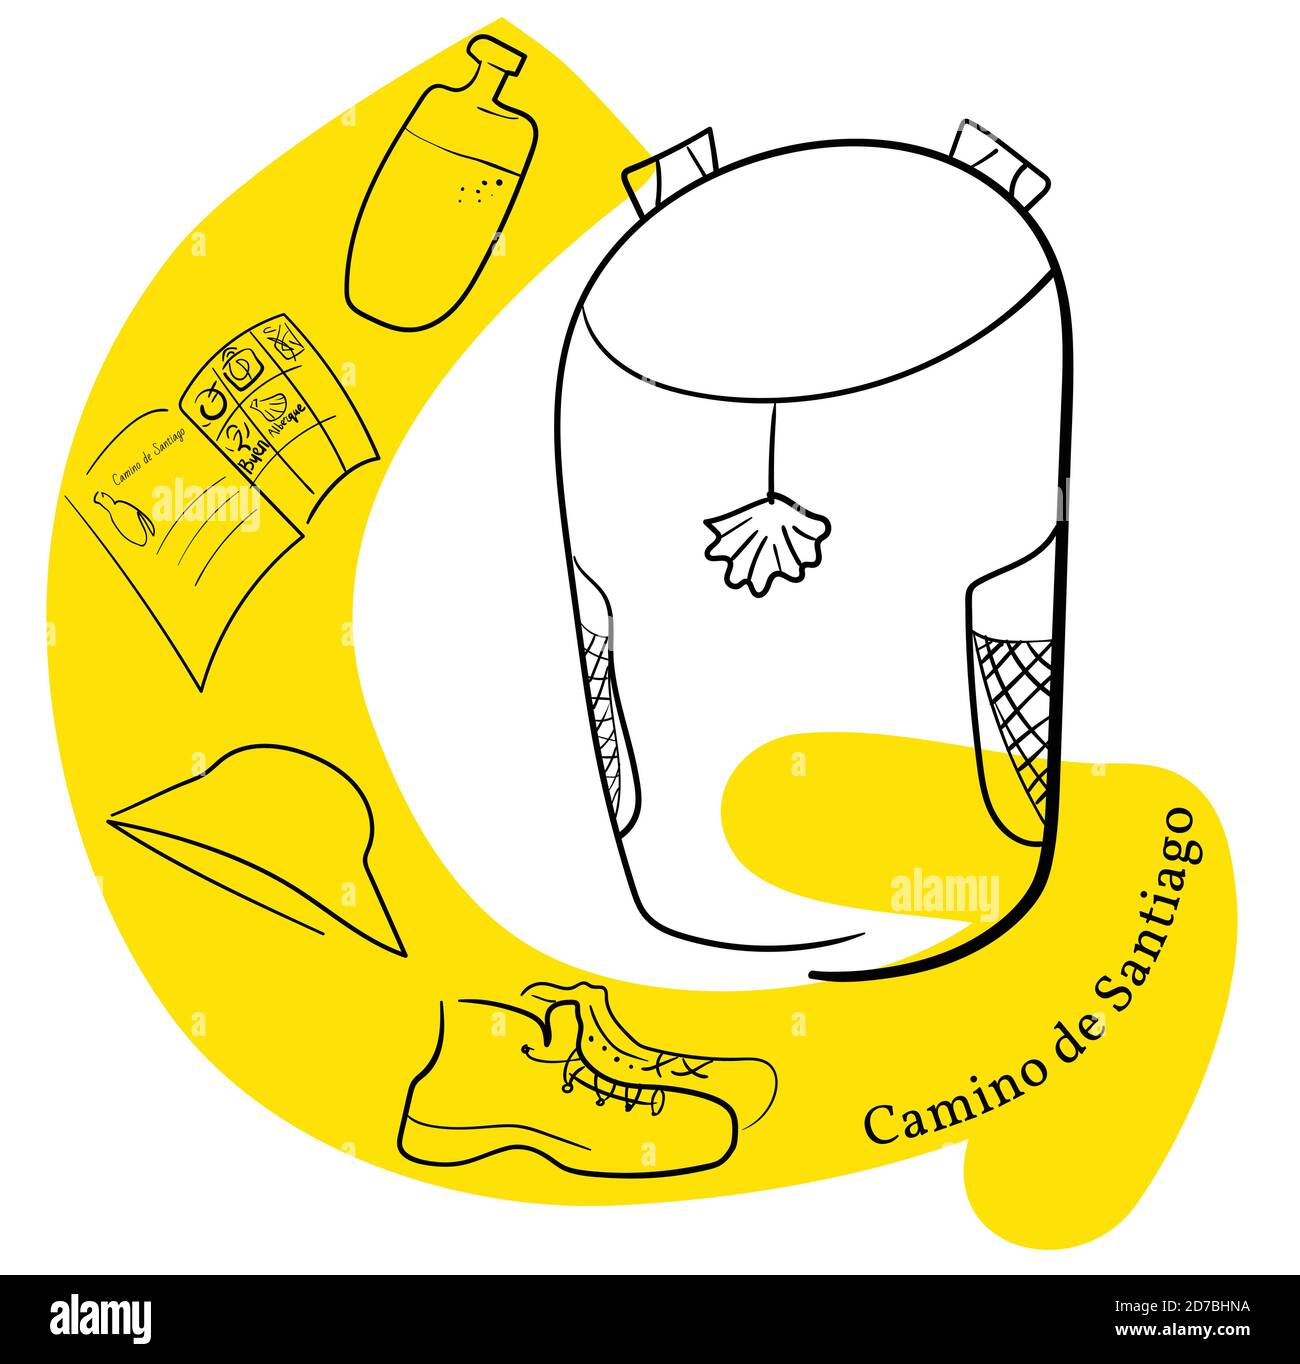 Pilgrim s backpack and yellow arrow. Panama hat, backpack, pilgrim passport, boots, water. Translation of the Camino de Santiago St. James s Path - A Stock Vector